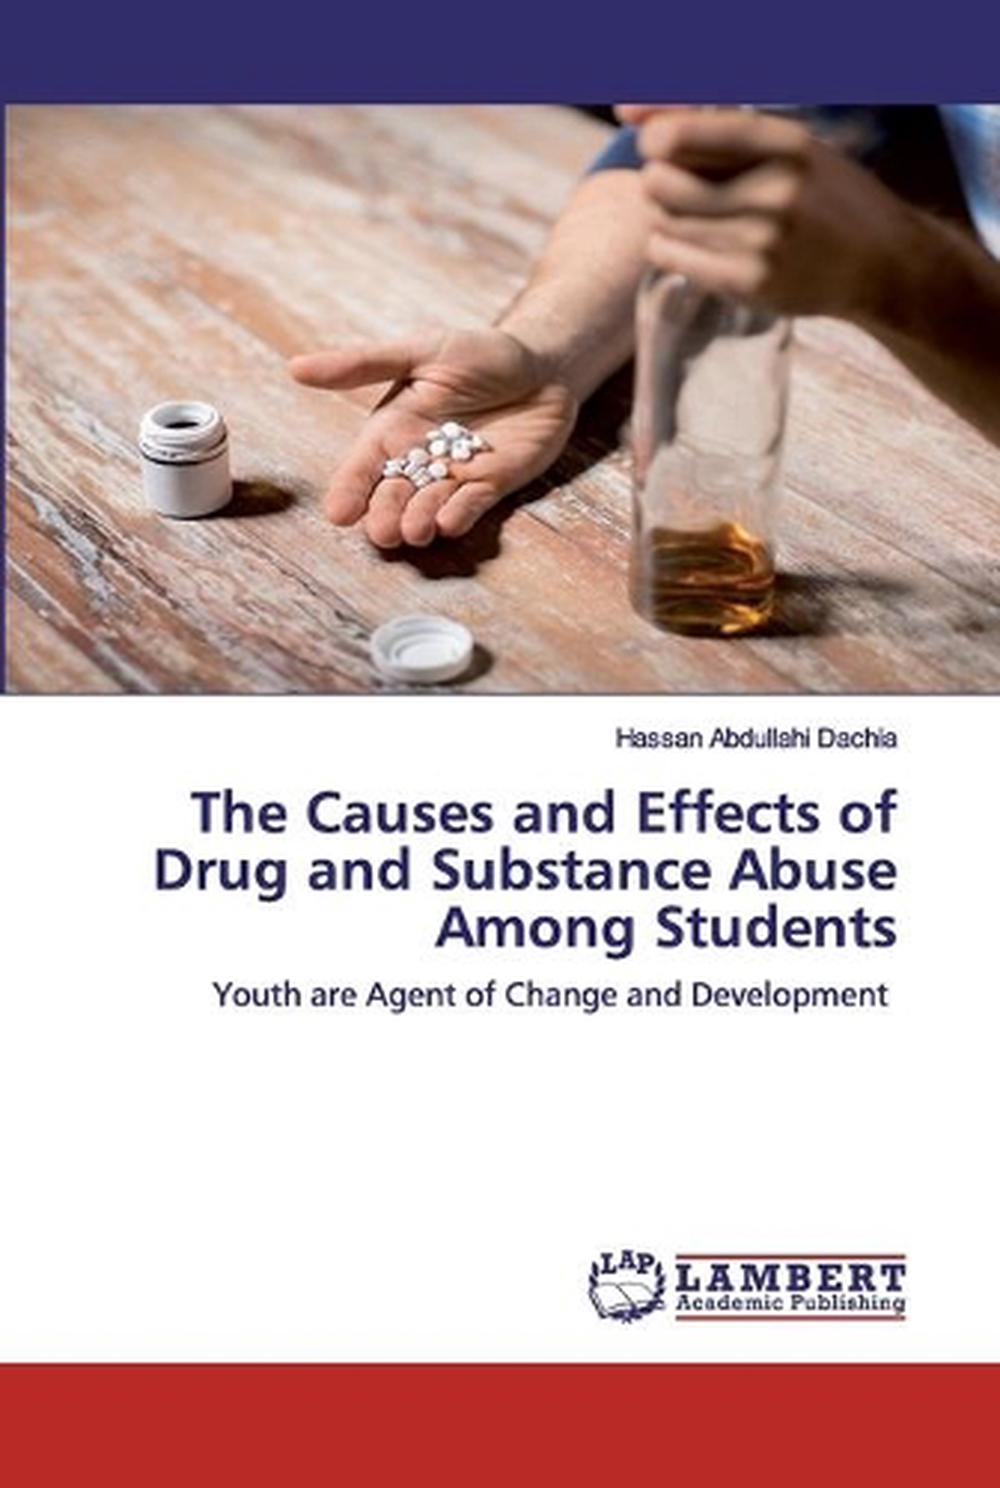 essay about drug abuse causes